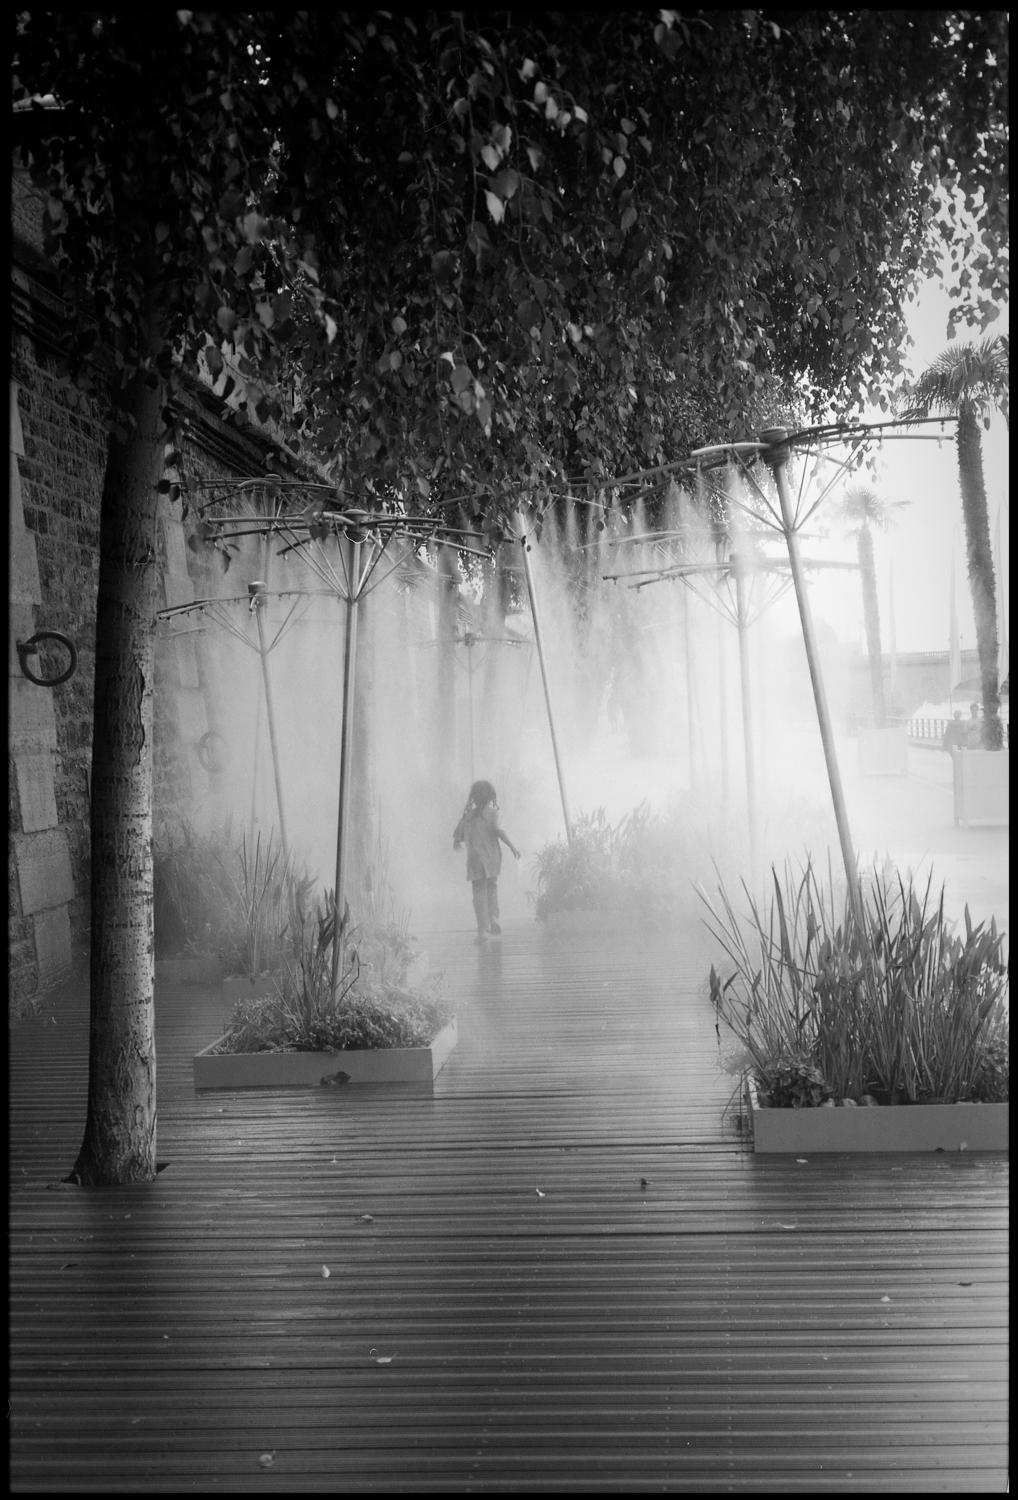 Paul Cooklin Black and White Photograph - Edition 1/10 - Young Girl Running, Paris, France, Silver Gelatin Photograph